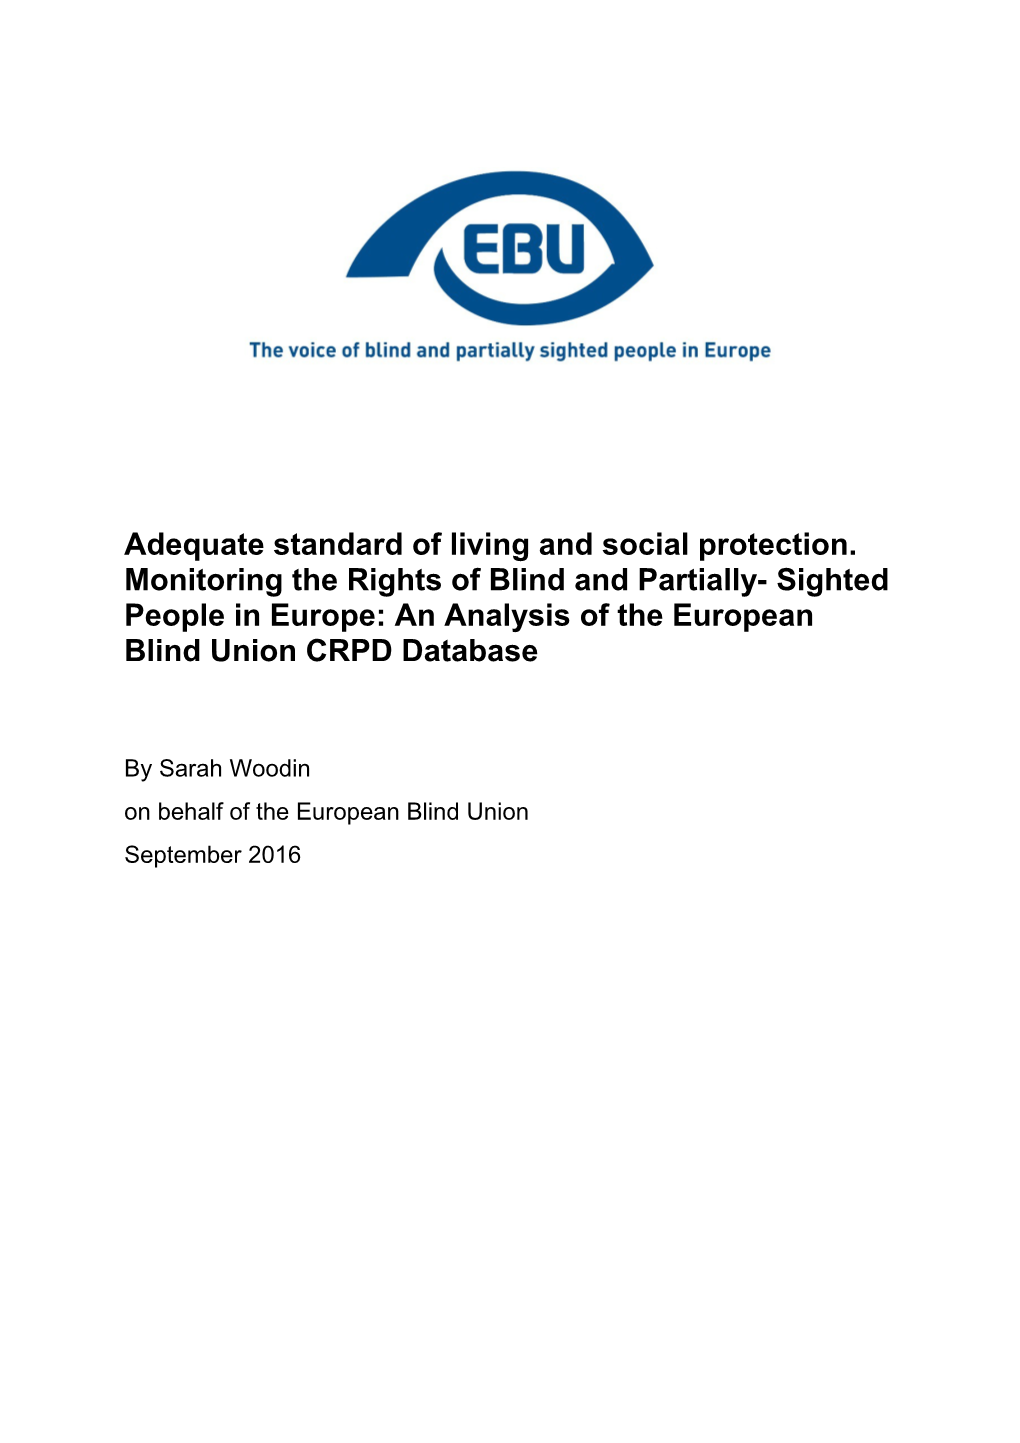 Adequate Standard of Living and Social Protection